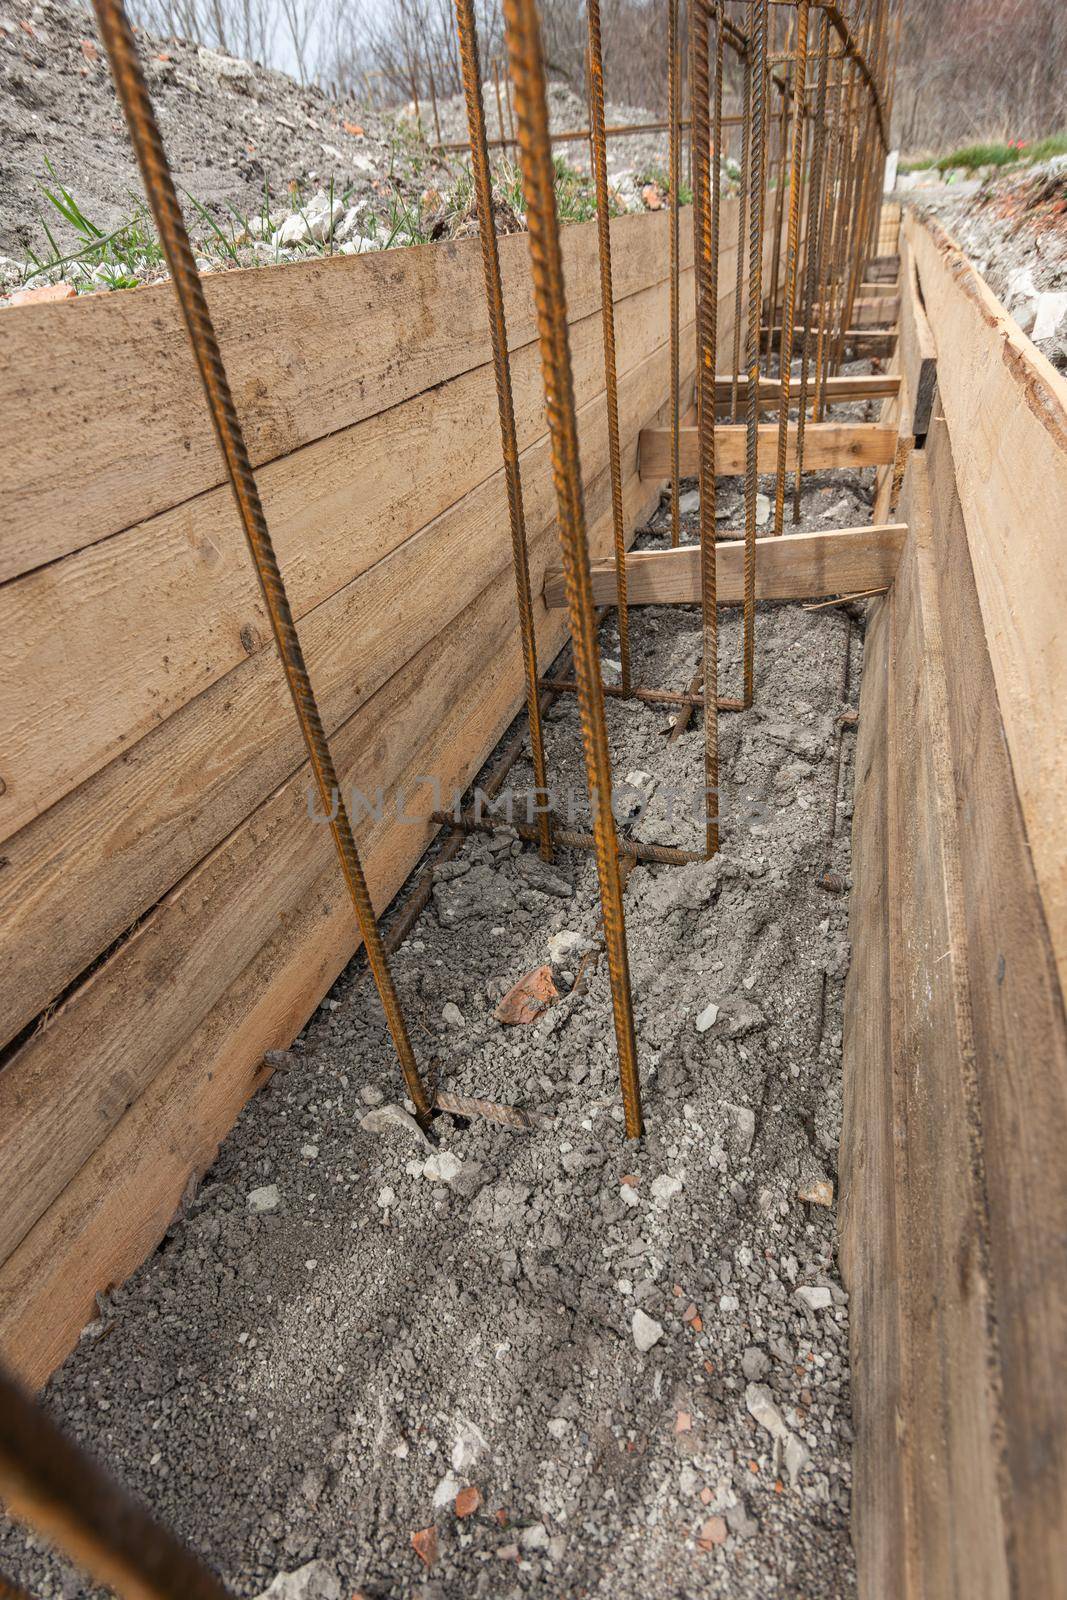 Reinforcement of a shallowly buried strip foundation of a low-rise residential building, the trench is covered with earth